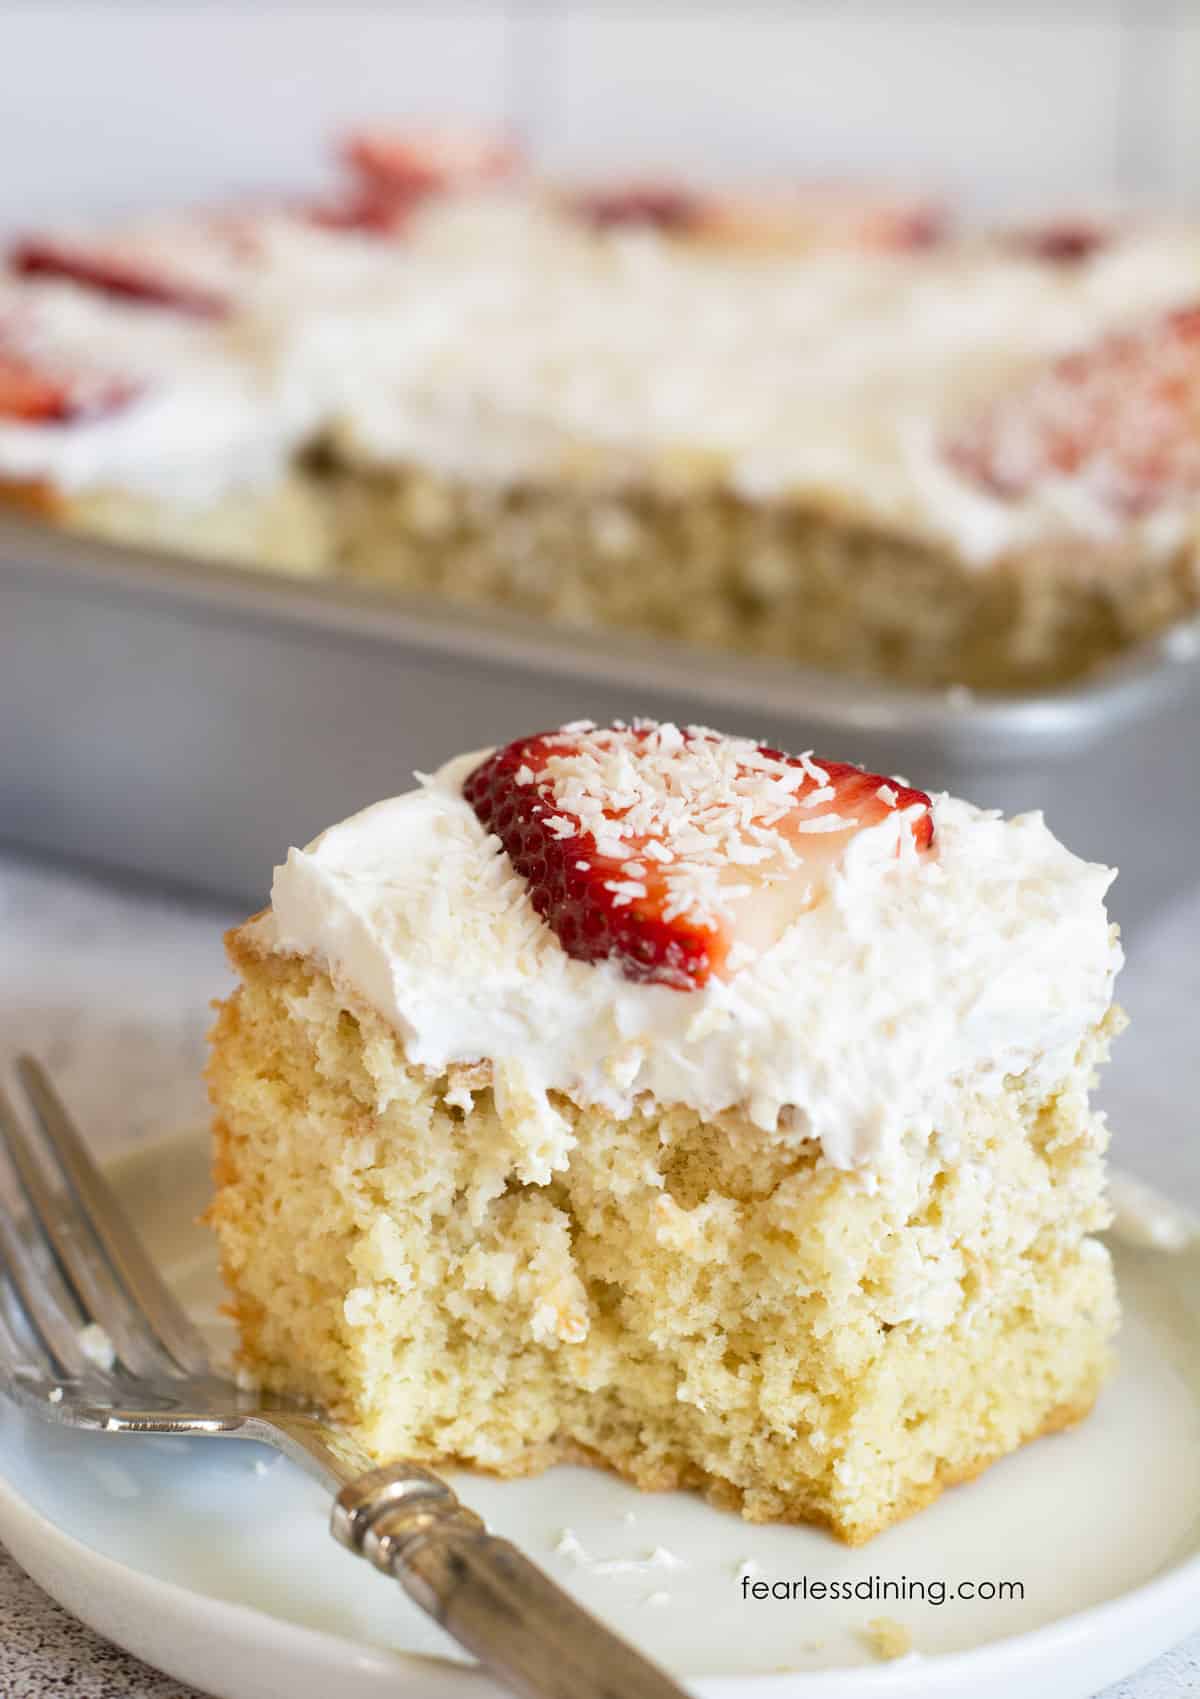 A slice of gluten free tres leches on a plate. It is topped with fresh whipped cream, coconut, and a strawberry.